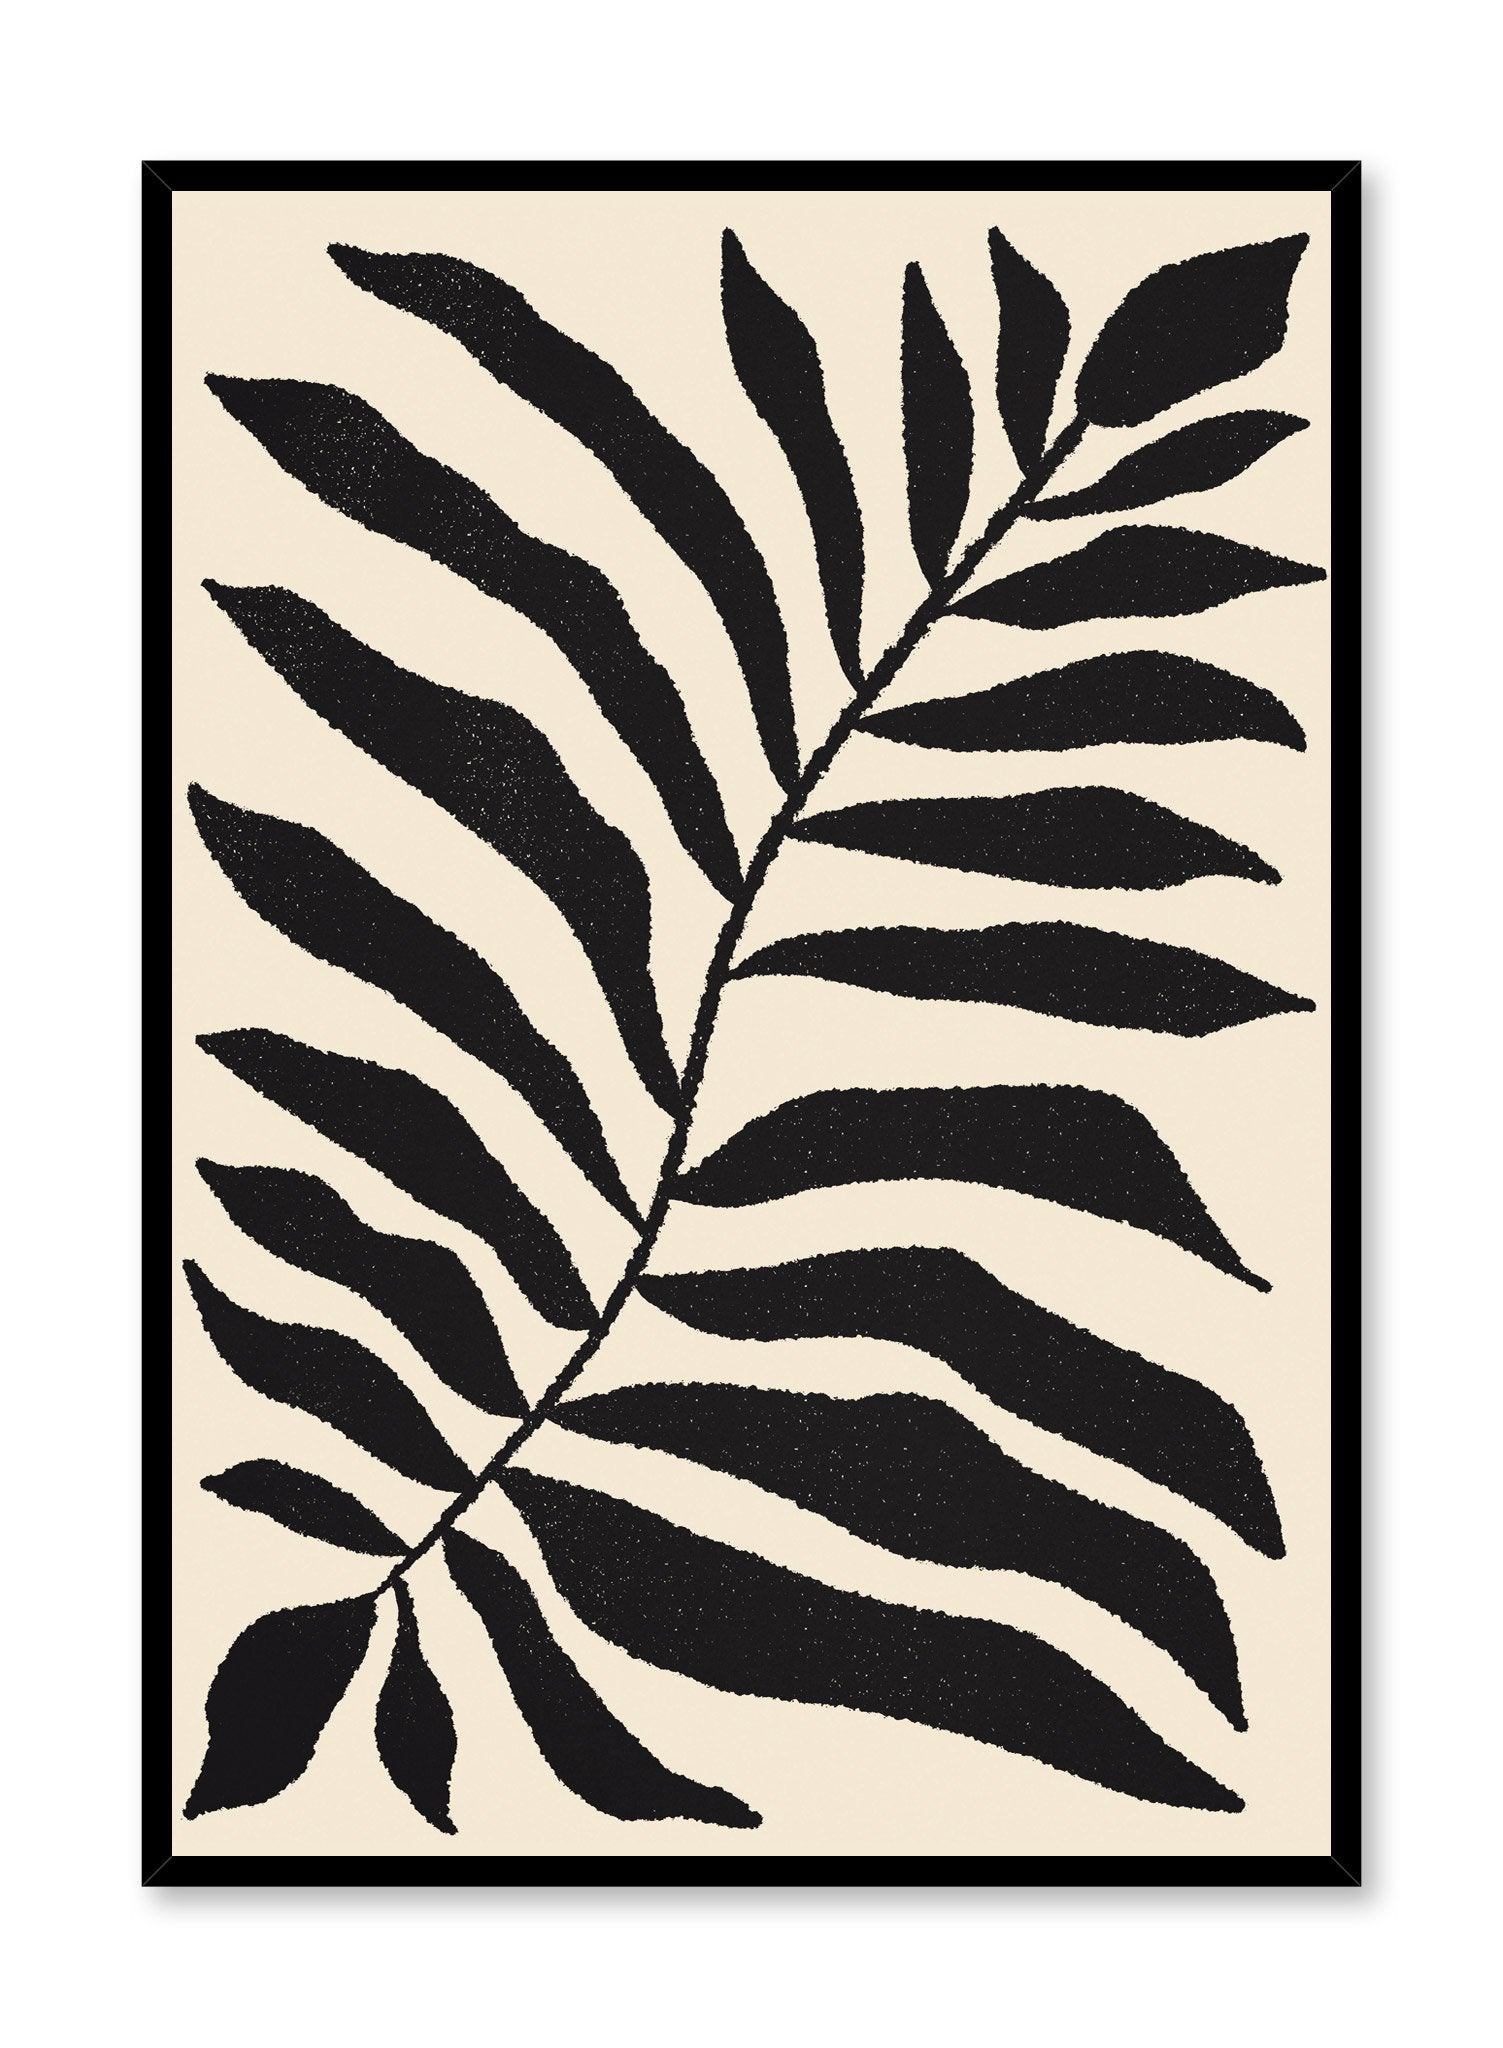 "Minimalist Fern" is a minimalist illustration poster by Opposite Wall in black and beige of an abstract black fern leaf over a beige background inspired by French painter Henri Matisse.